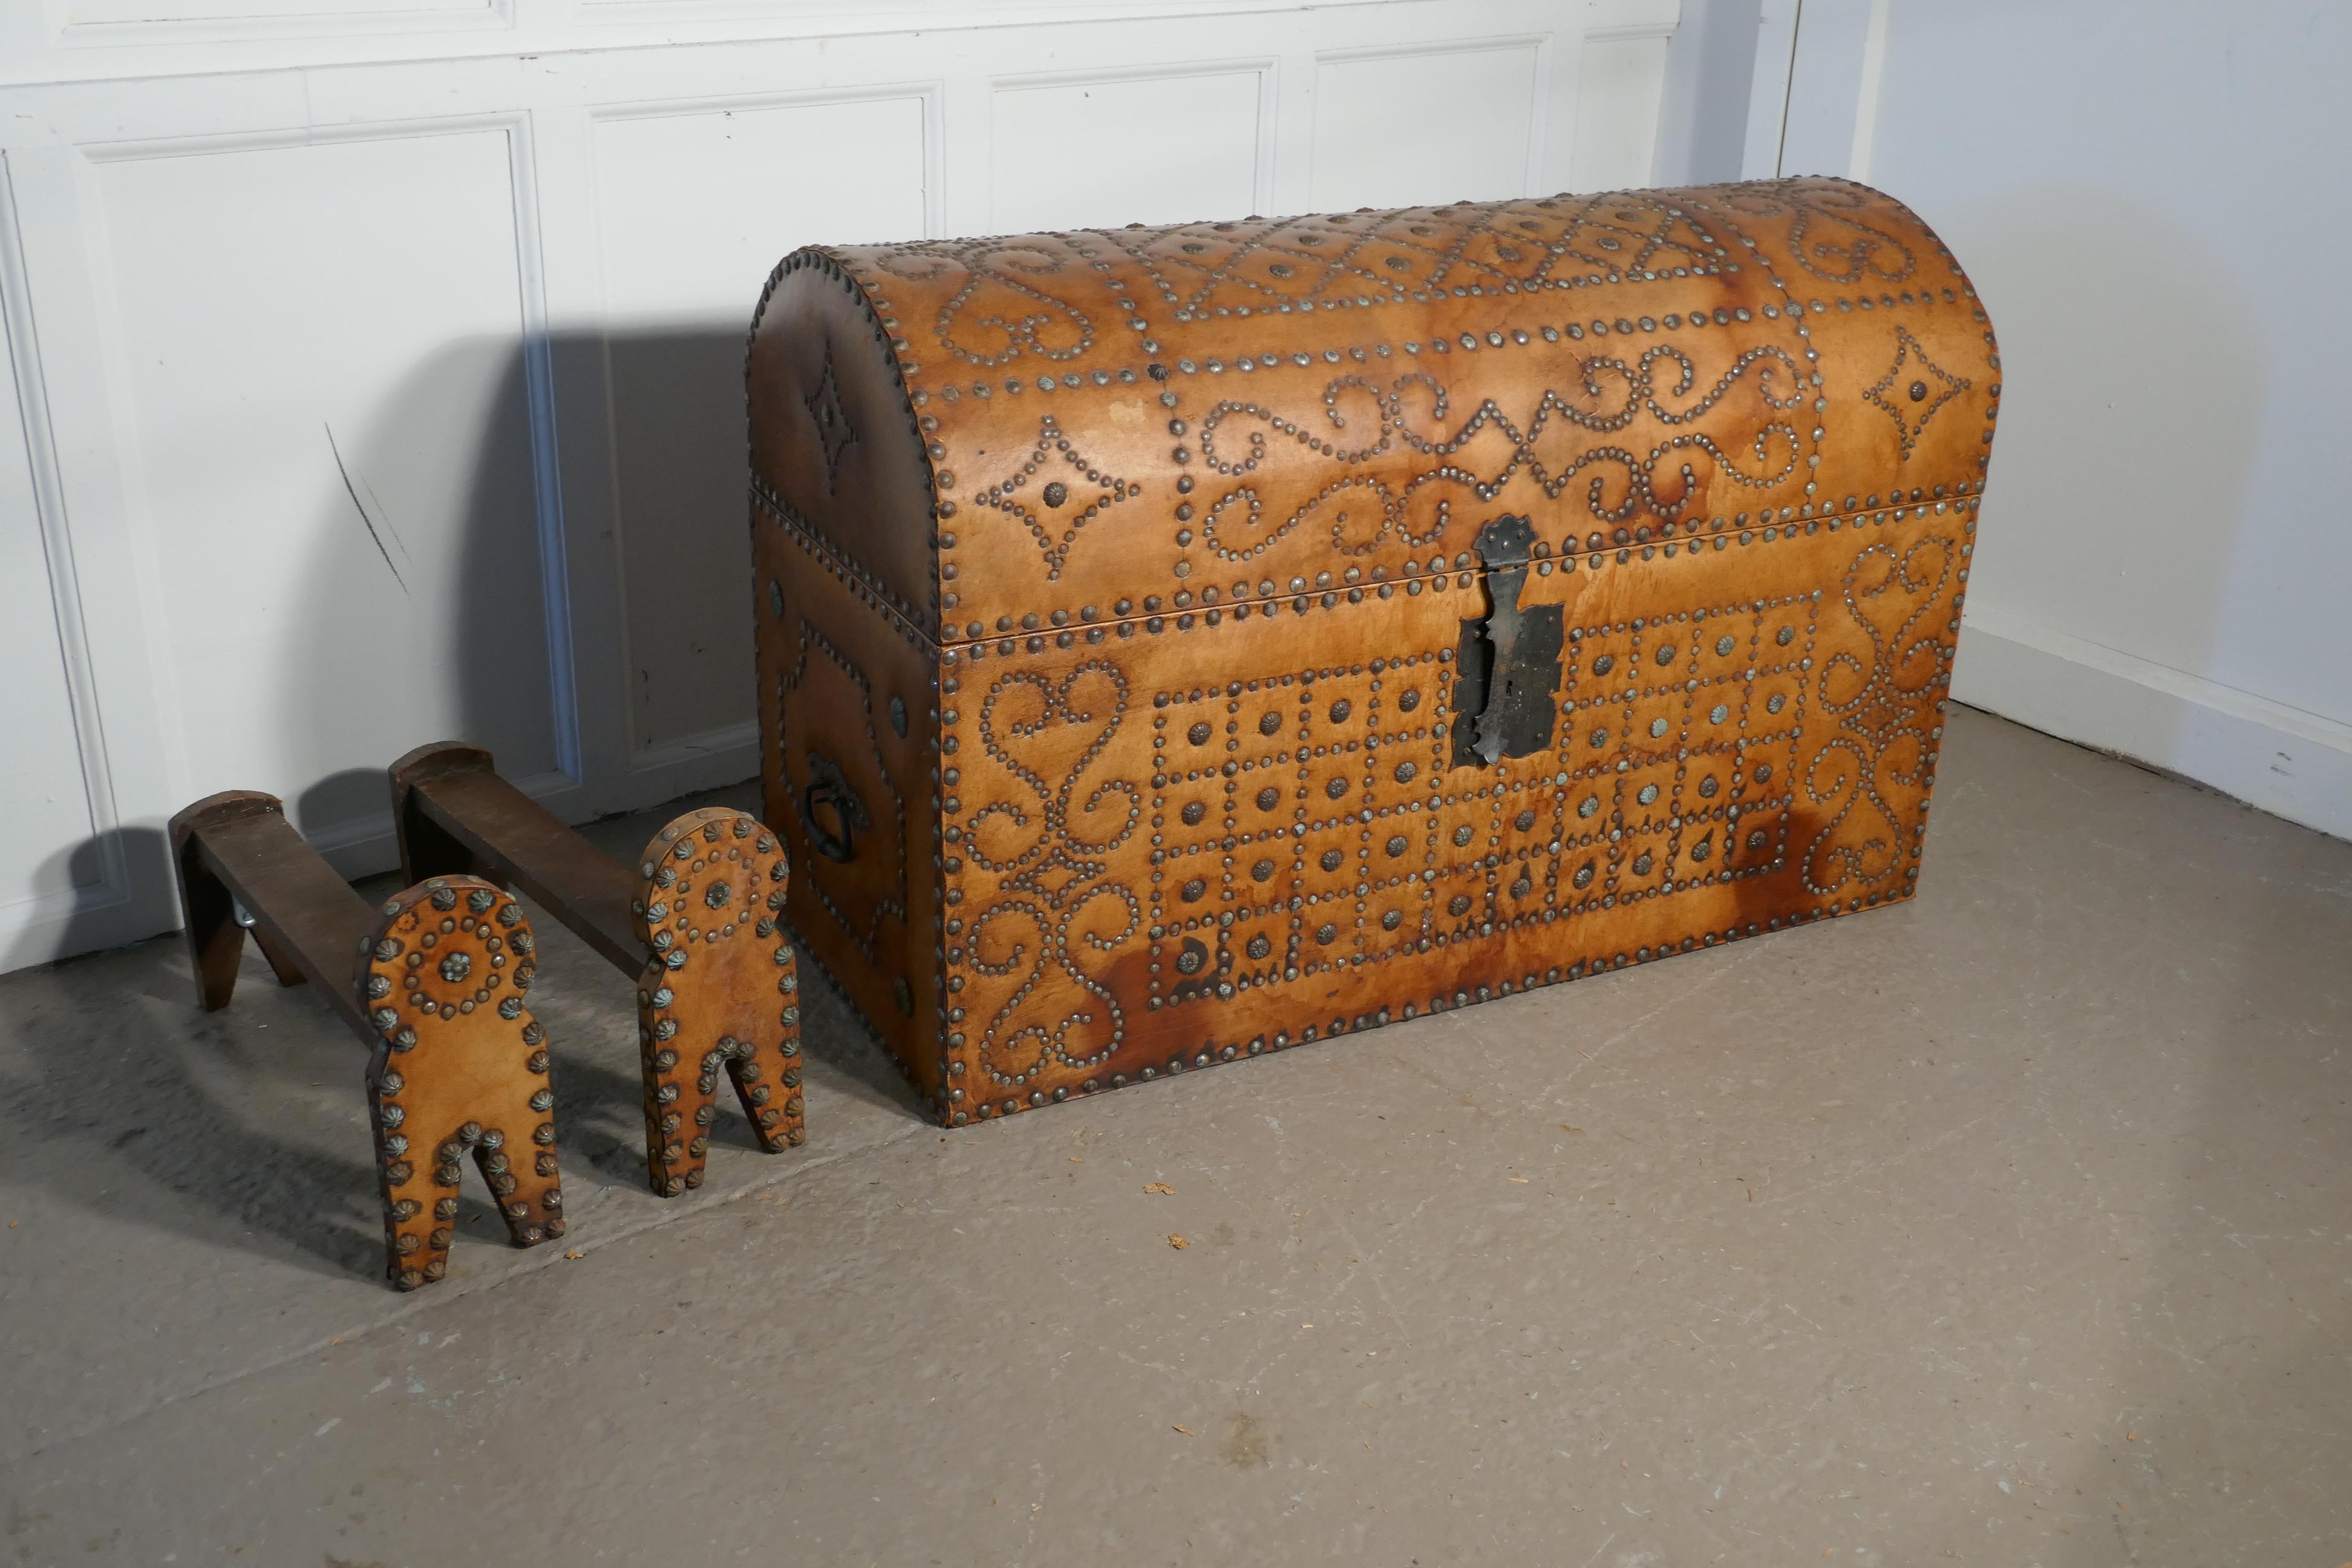 Spanish dome top leather brass studded marriage chest or travel trunk

This is a very attractive piece, it has a dome top and it is covered in superb quality thick Tan leather with an elaborate brass stud work decoration. 
 
The trunk is lined